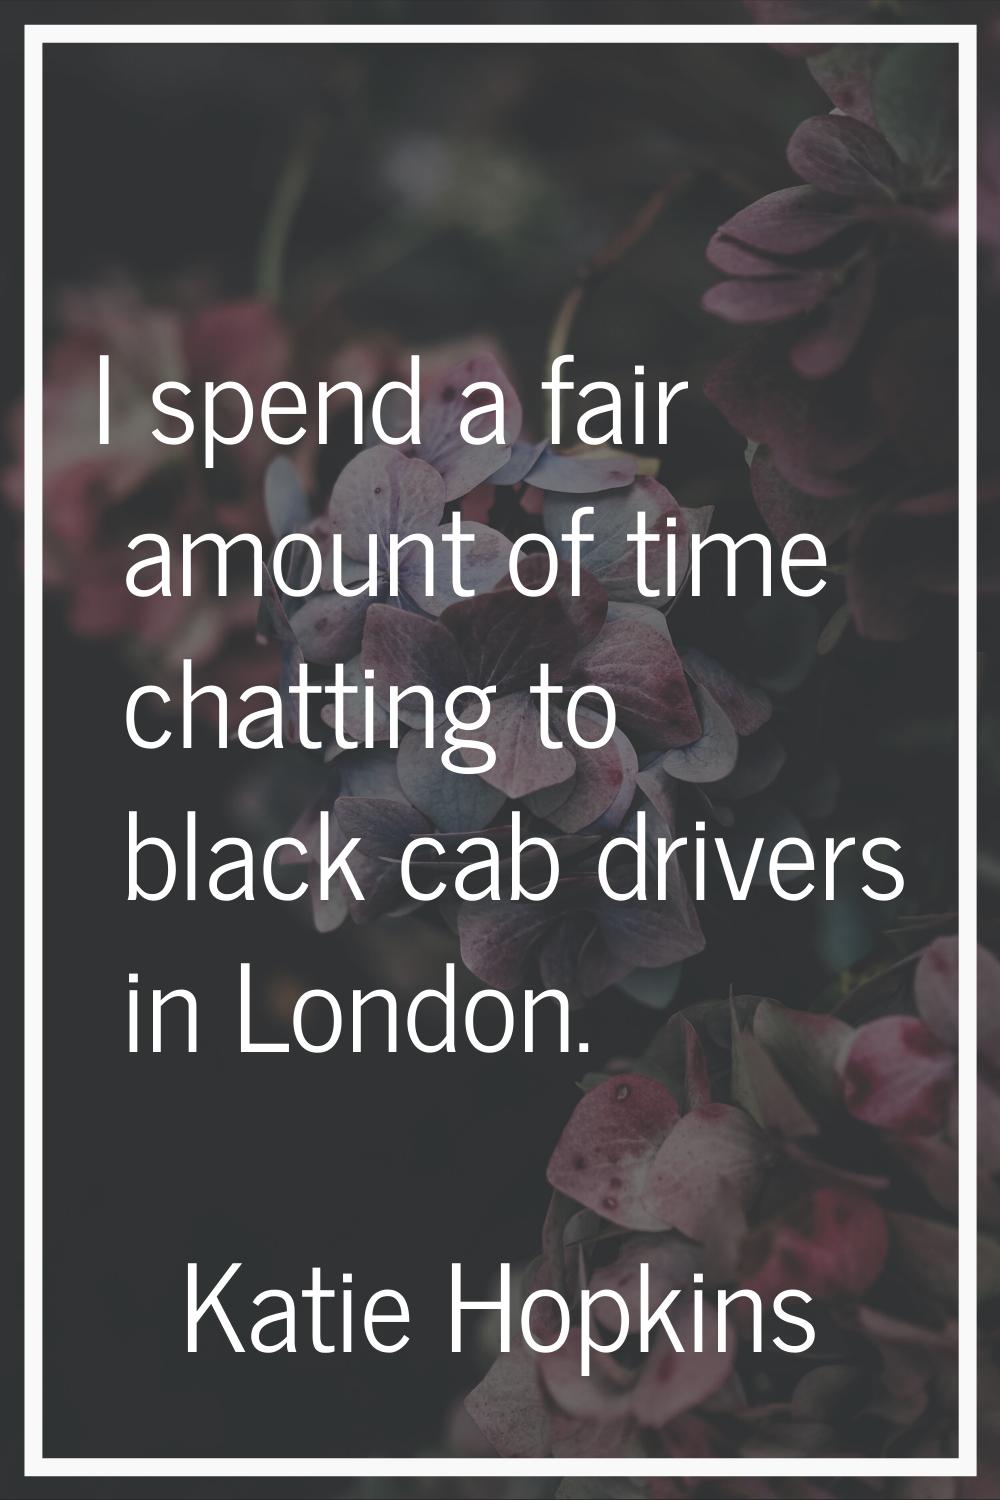 I spend a fair amount of time chatting to black cab drivers in London.